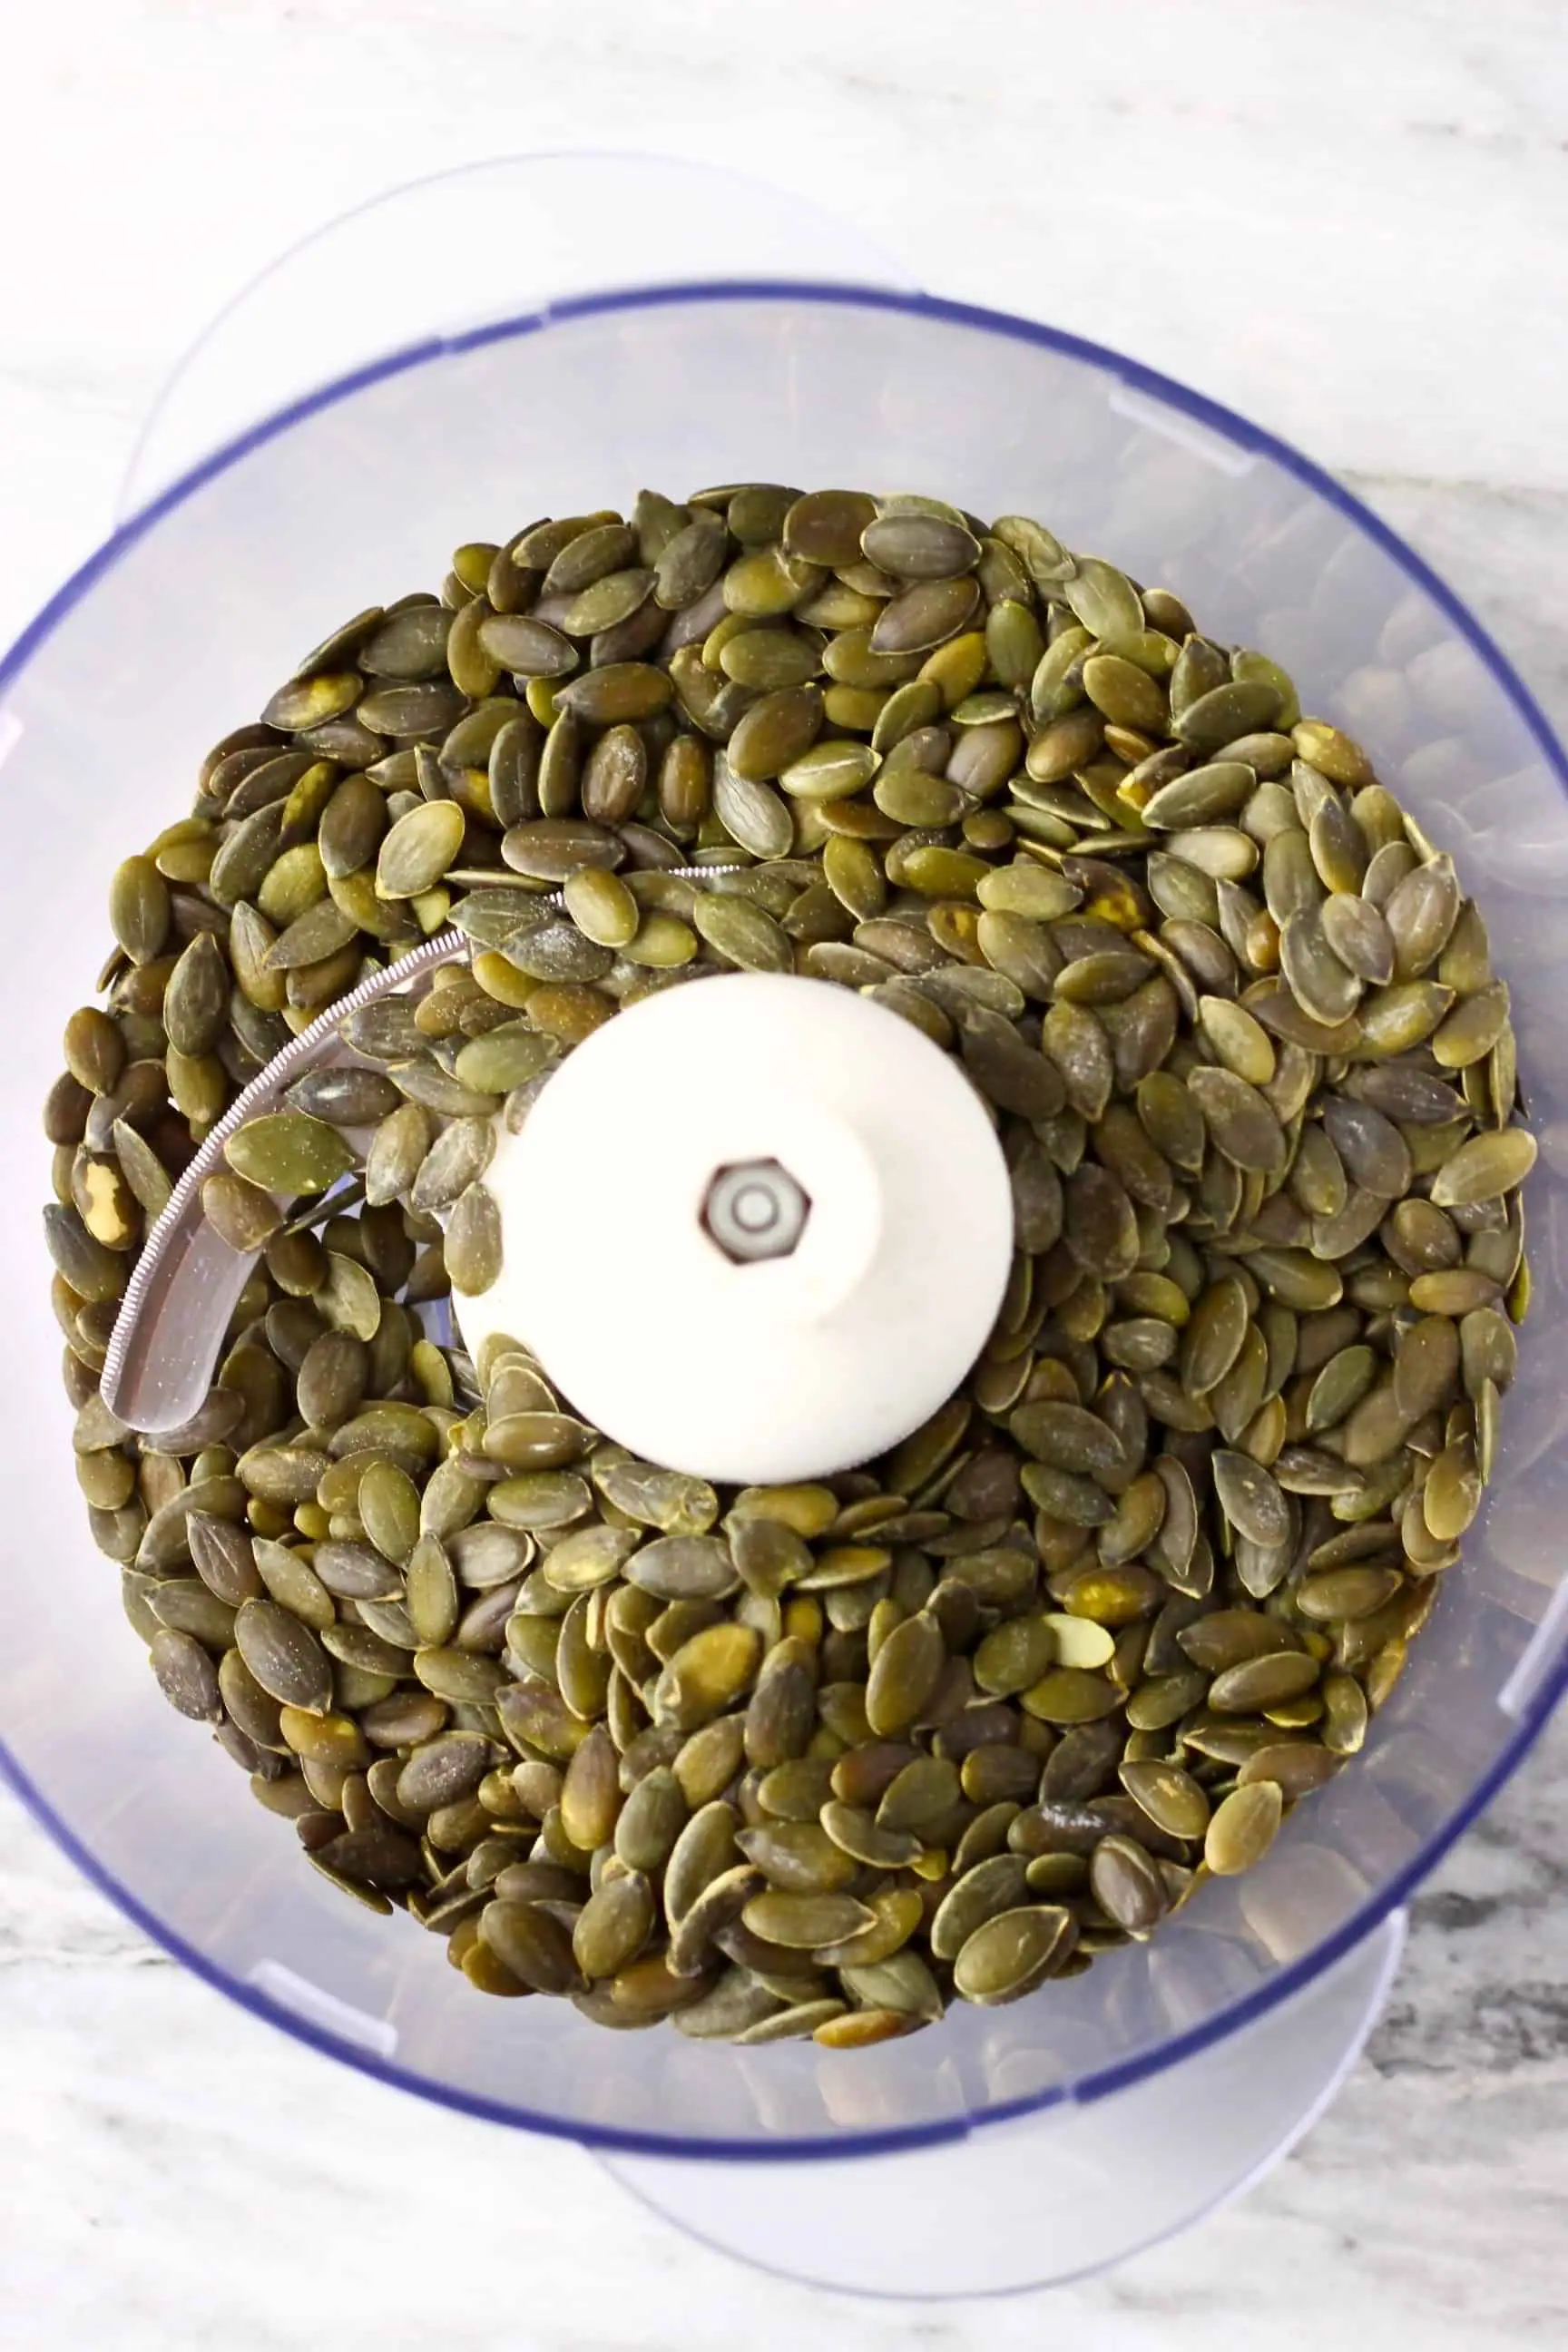 Pumpkin seeds in a food processor against a marble background